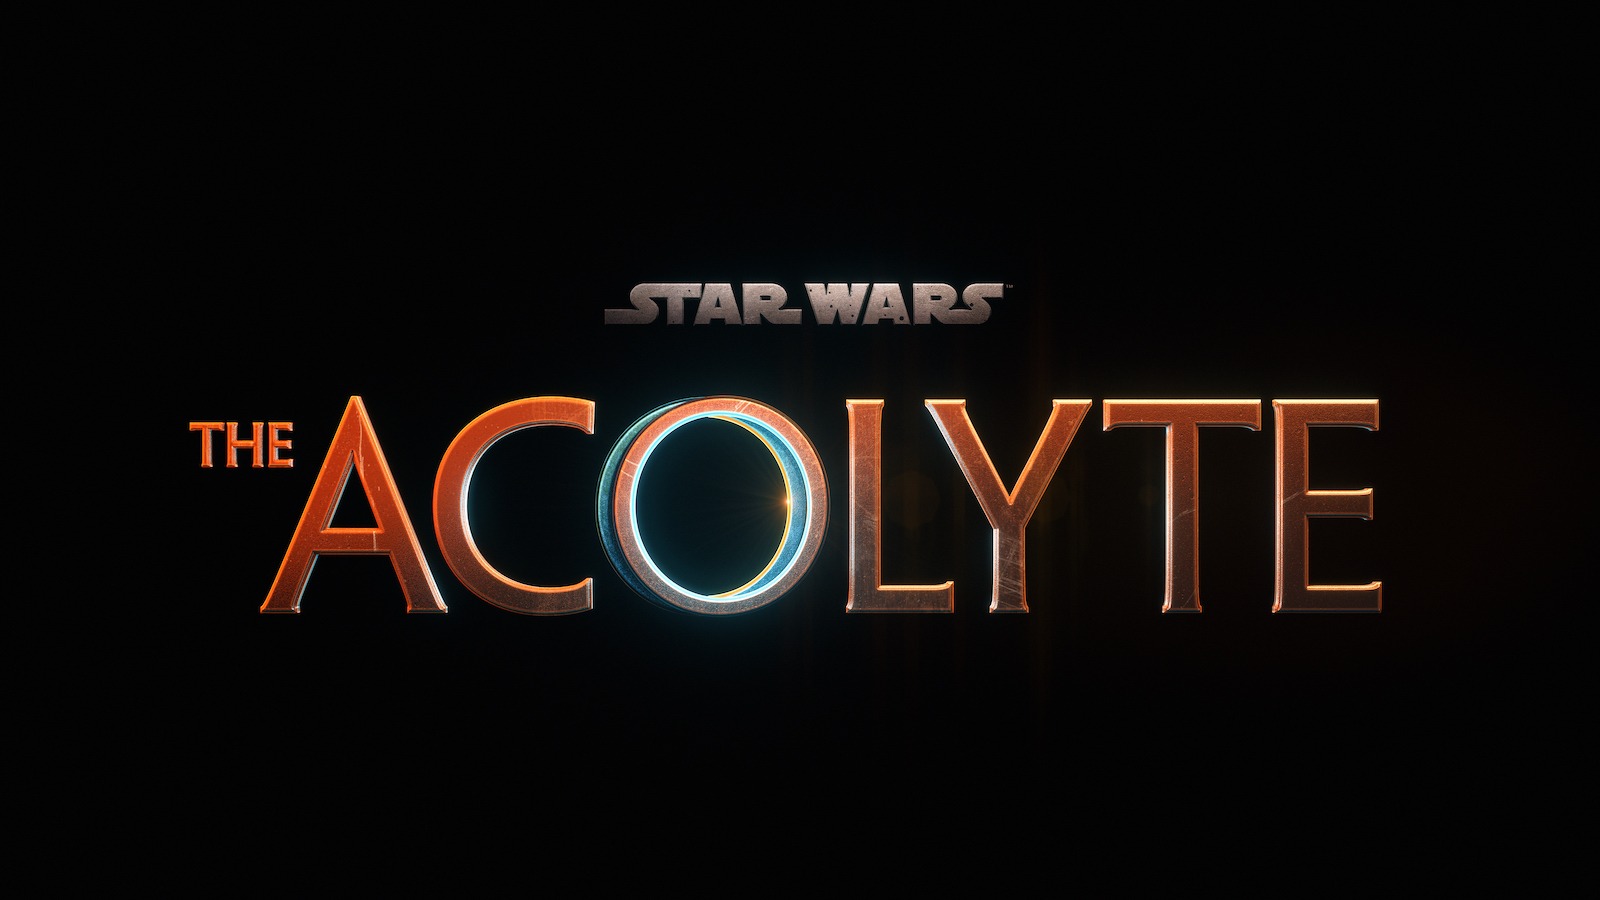 #The Acolyte: Disney+ Releases New Star Wars Series Trailer and Poster